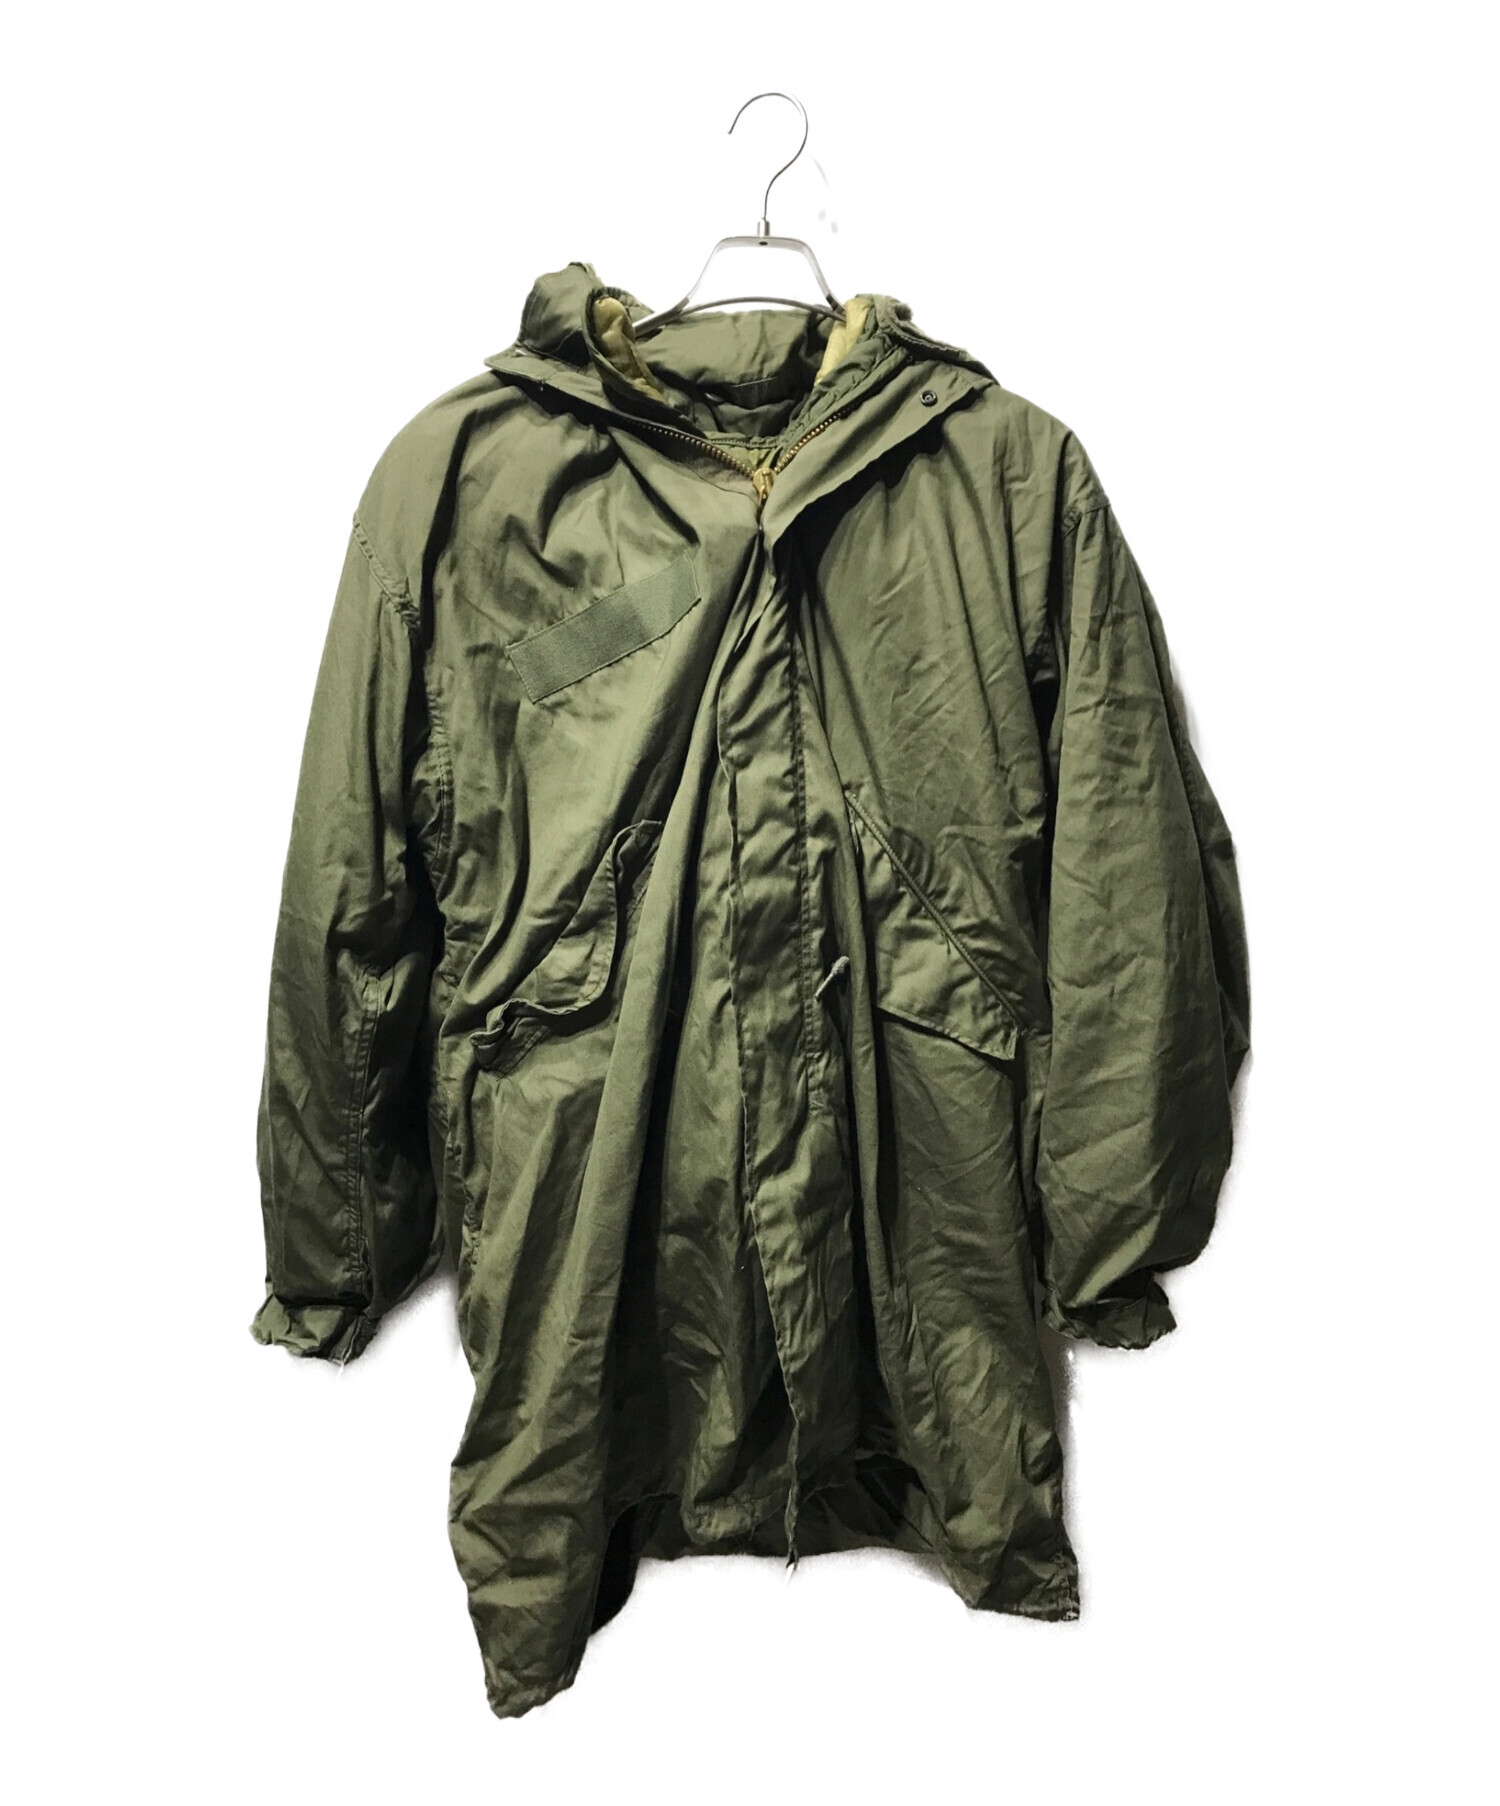 USARMY PARKA EXTREME COLD WEATHERモッズコート